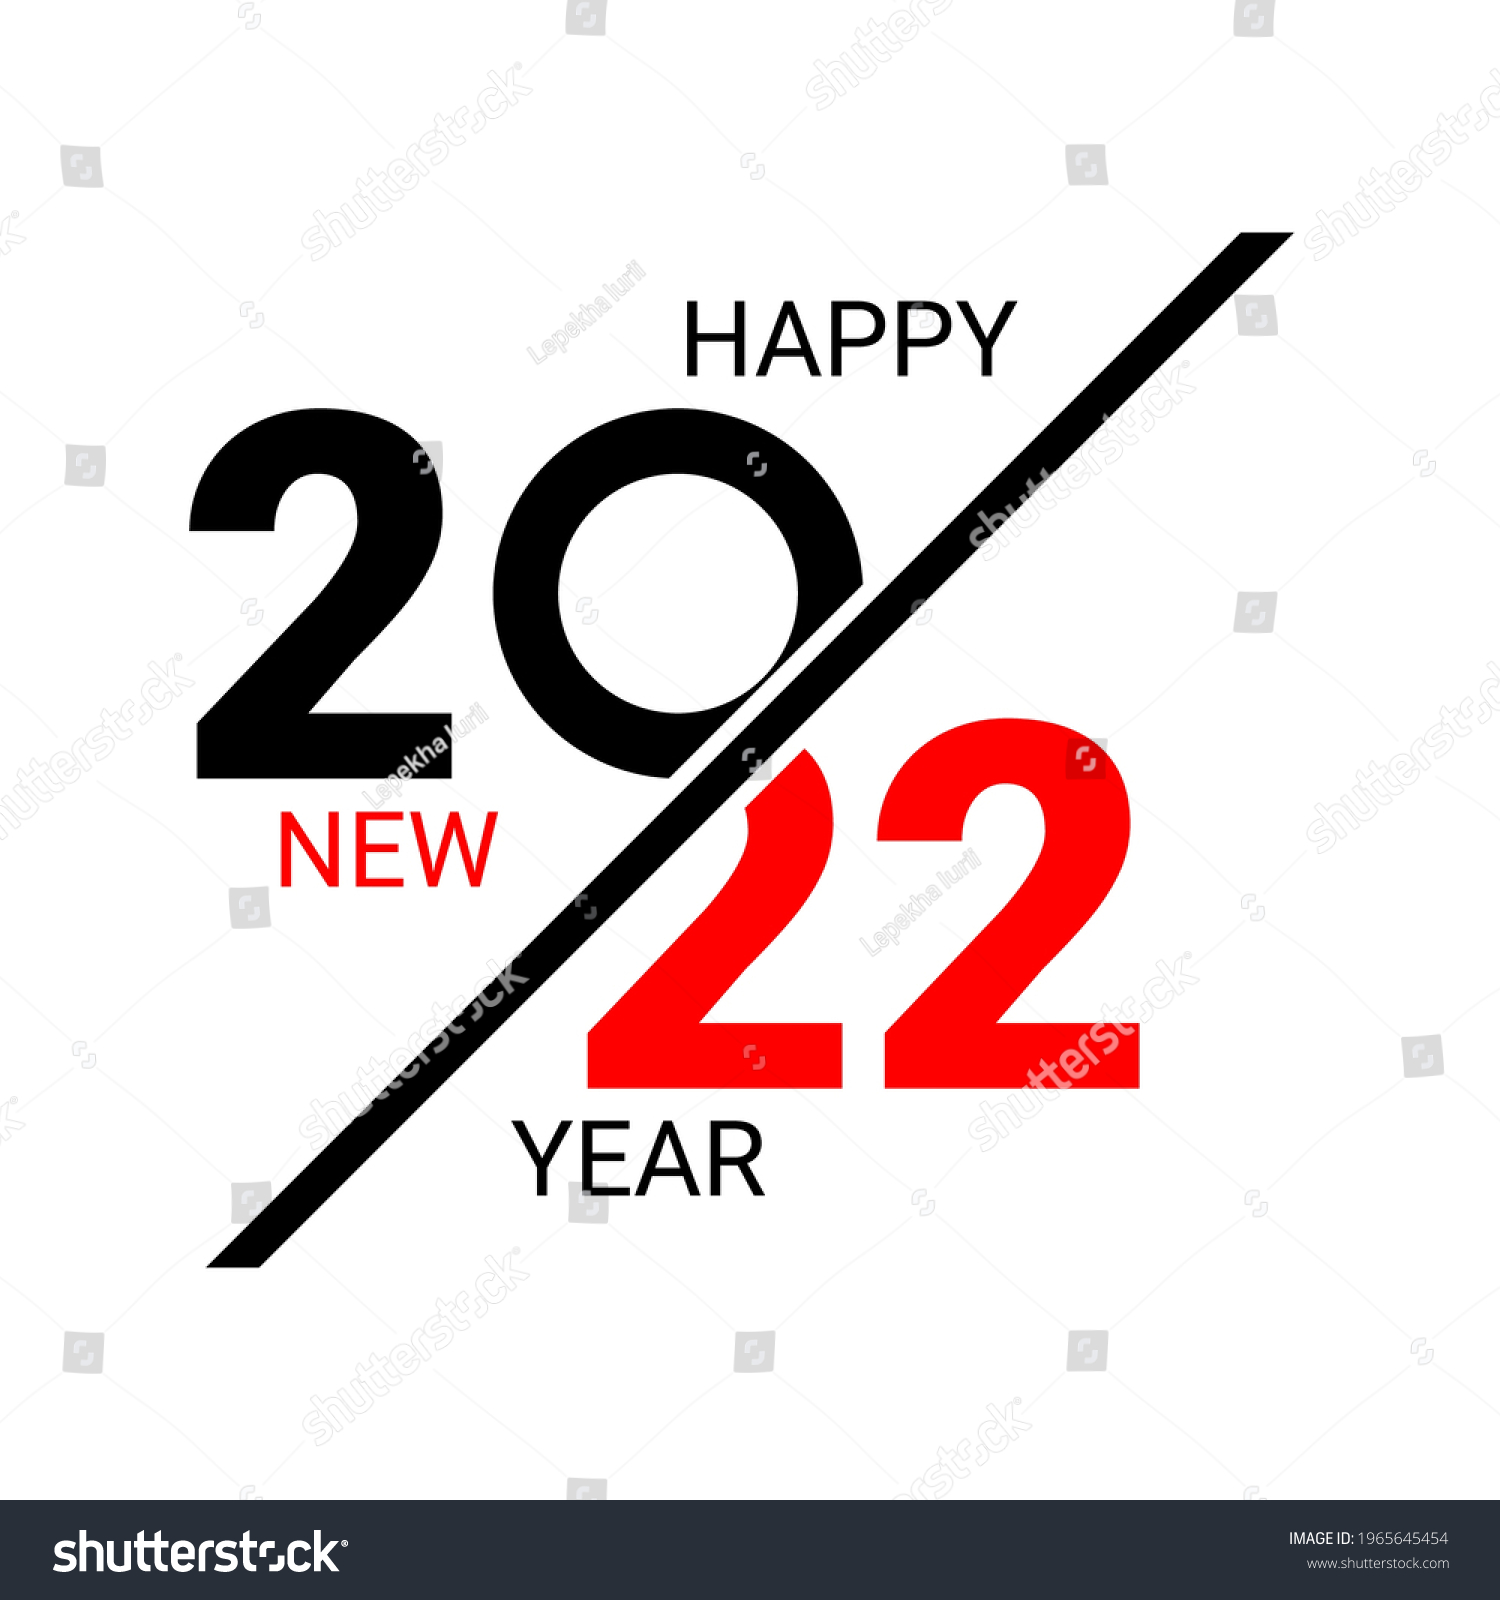 Happy New Year 2022 Text Design Stock Vector (Royalty Free) 1965645454 ...